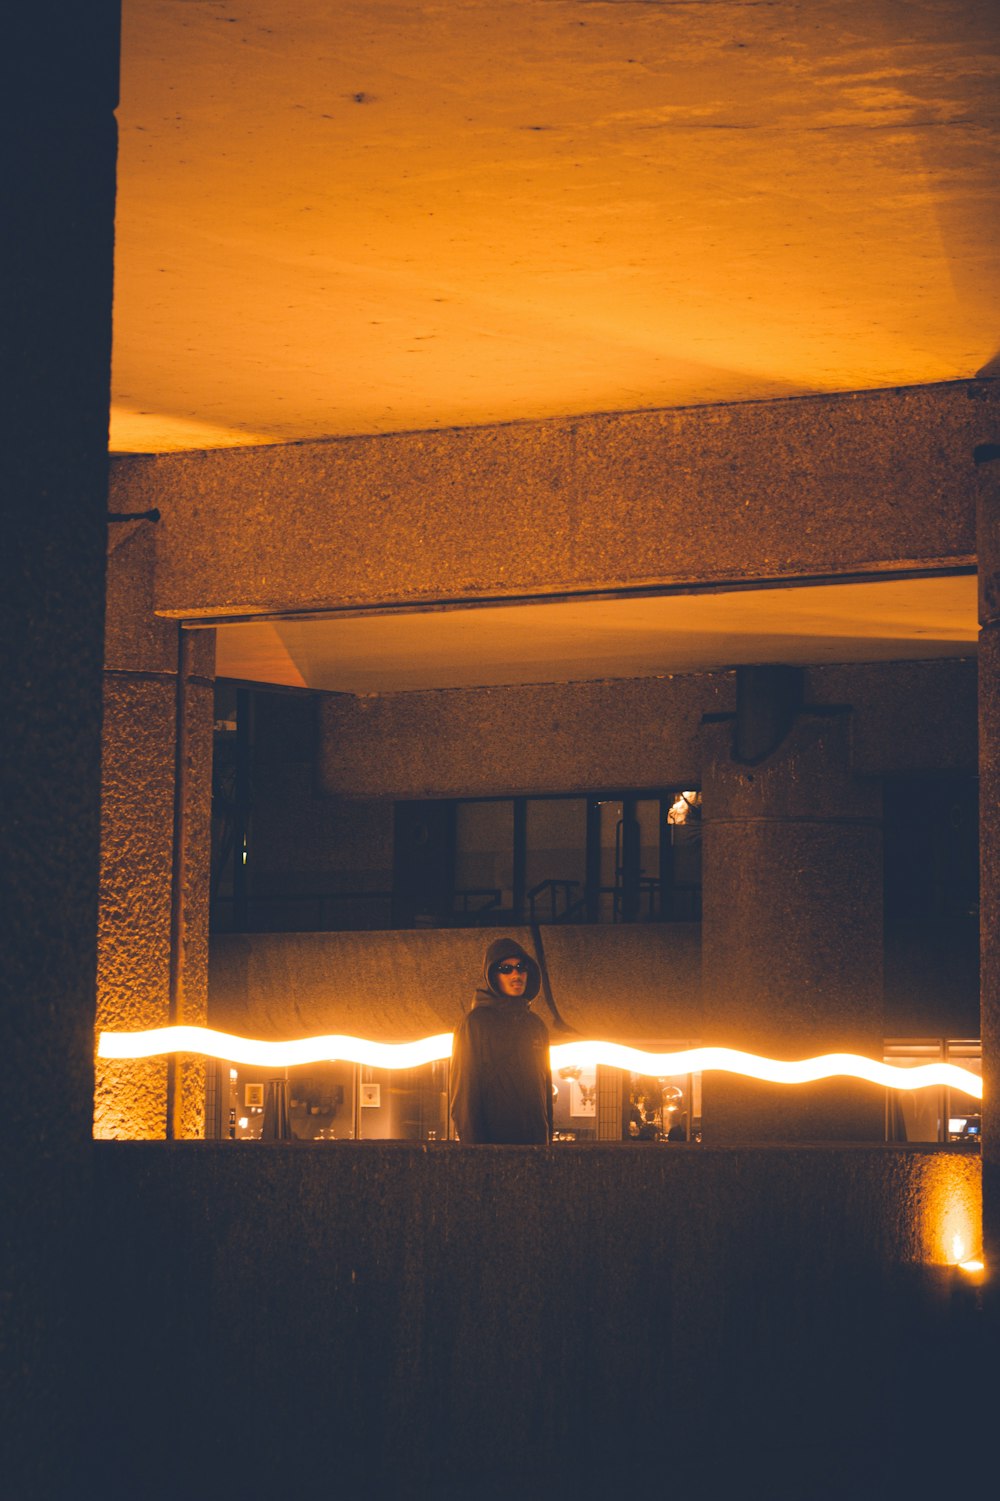 a person standing in front of a building at night